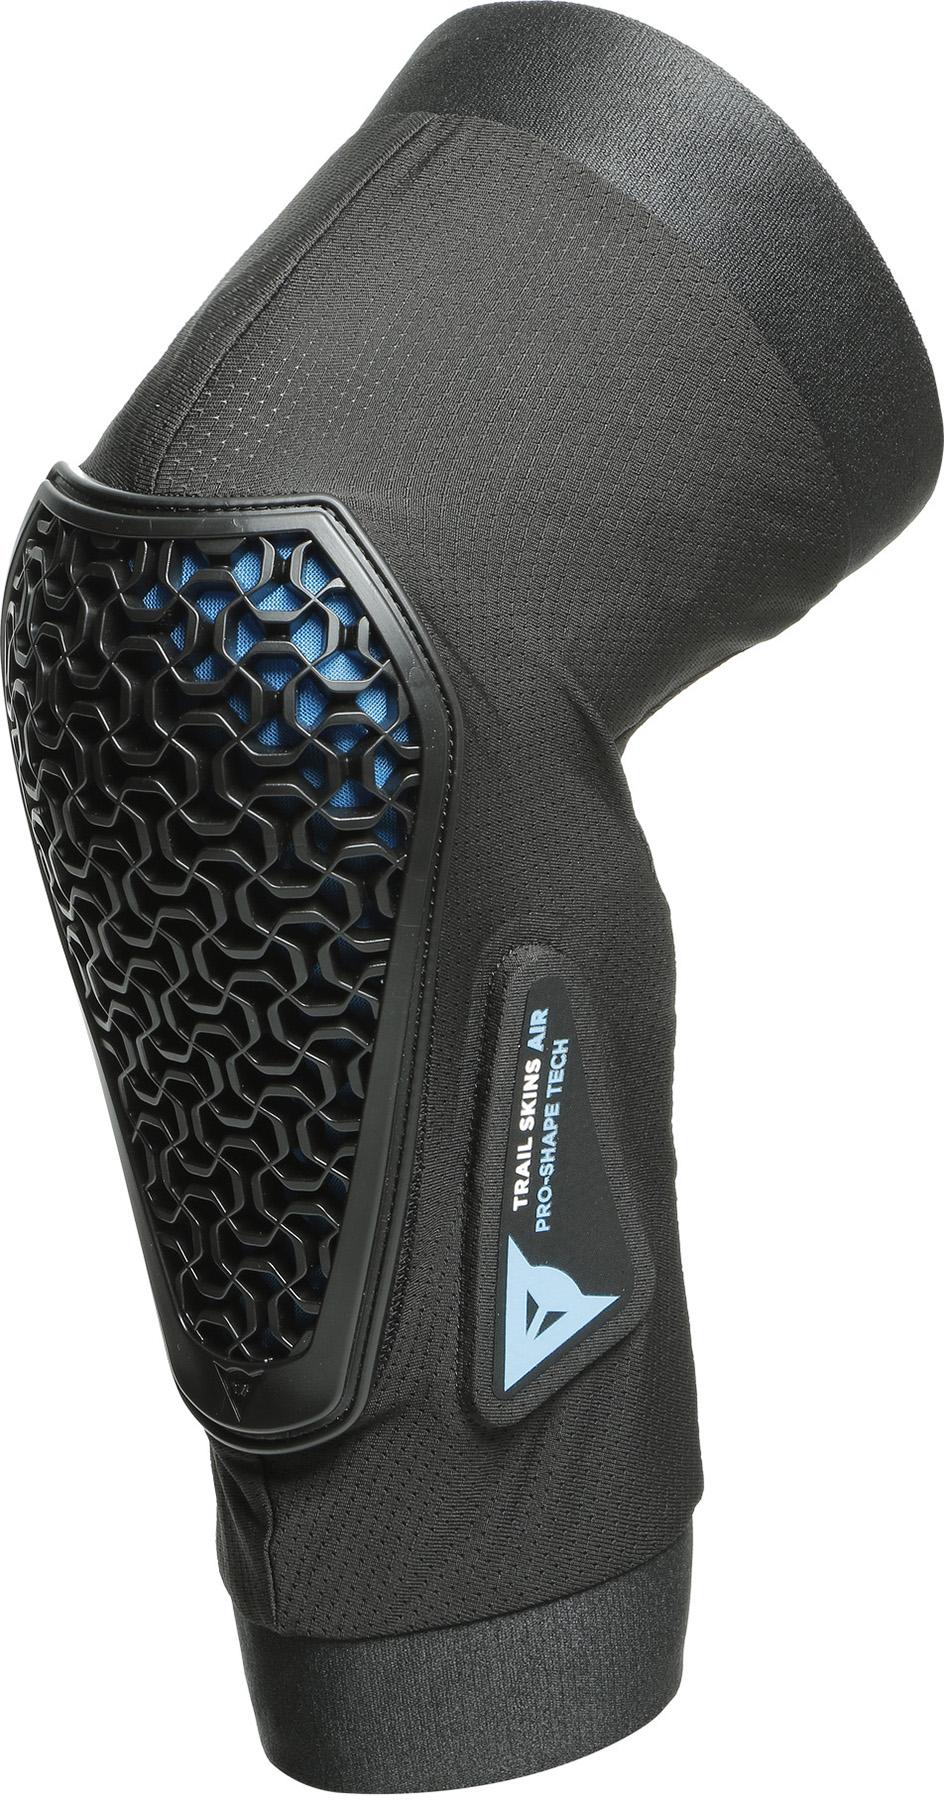 Dainese Trail Skins Air Knee Guards  Black